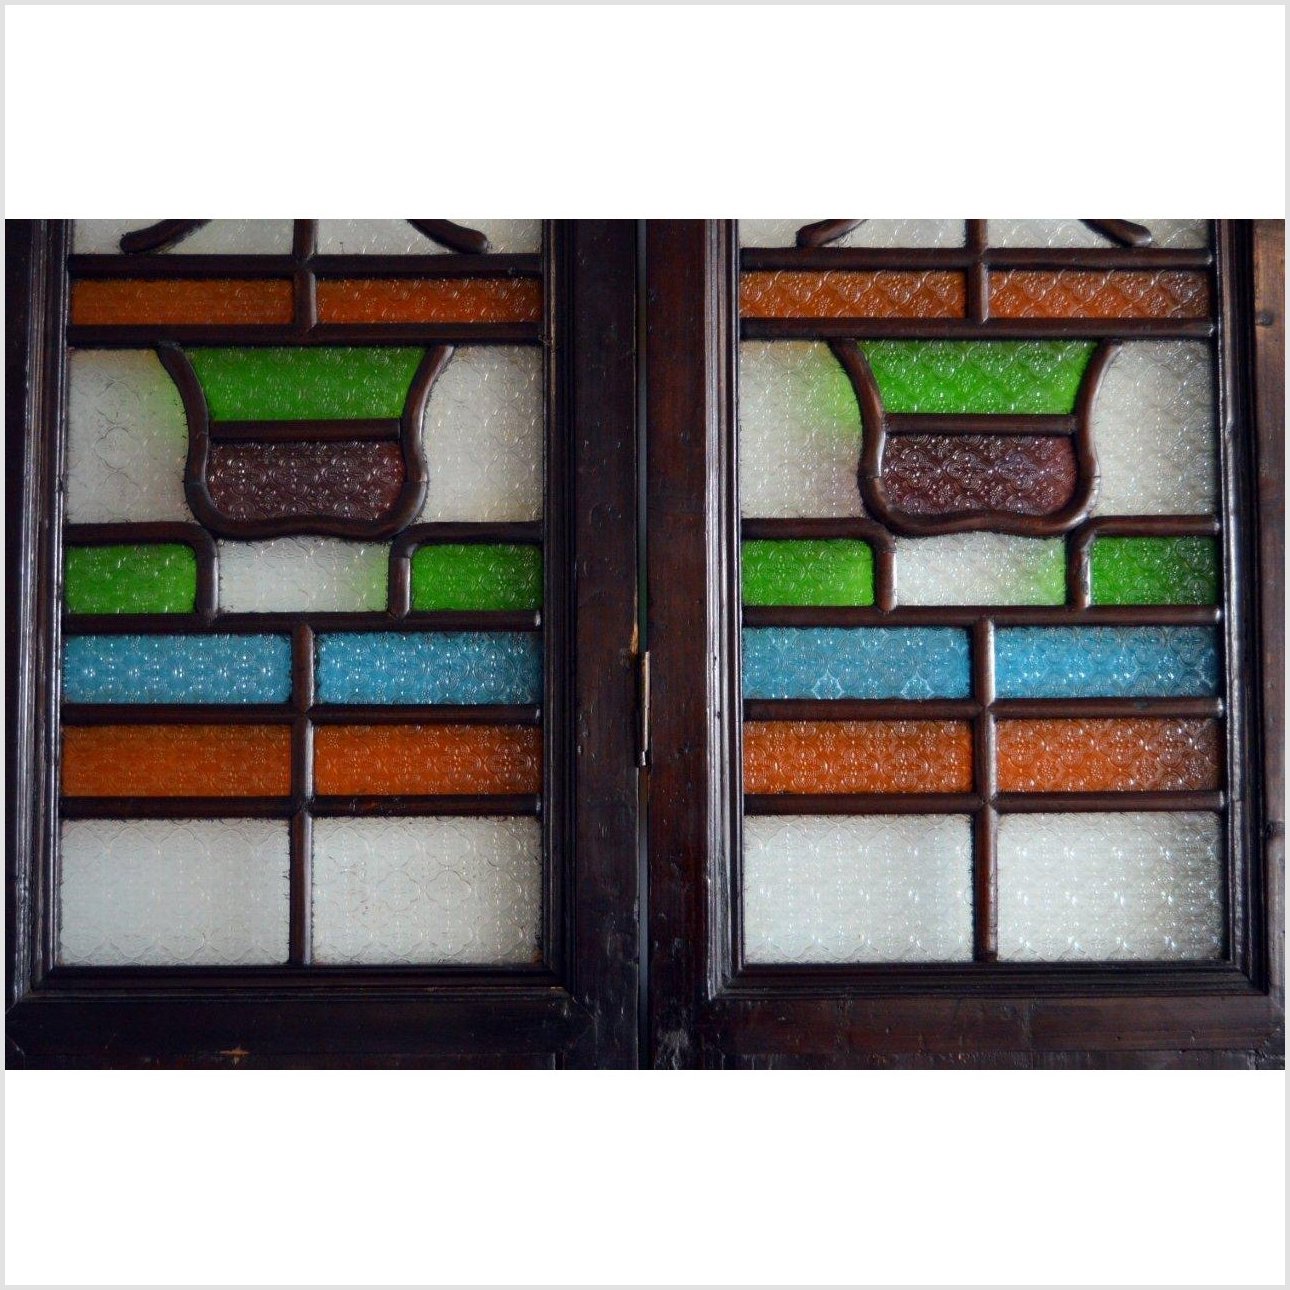 4-Panel Multi-Color Stained Glass and Carved Bottom Panels-YN2931-9. Asian & Chinese Furniture, Art, Antiques, Vintage Home Décor for sale at FEA Home